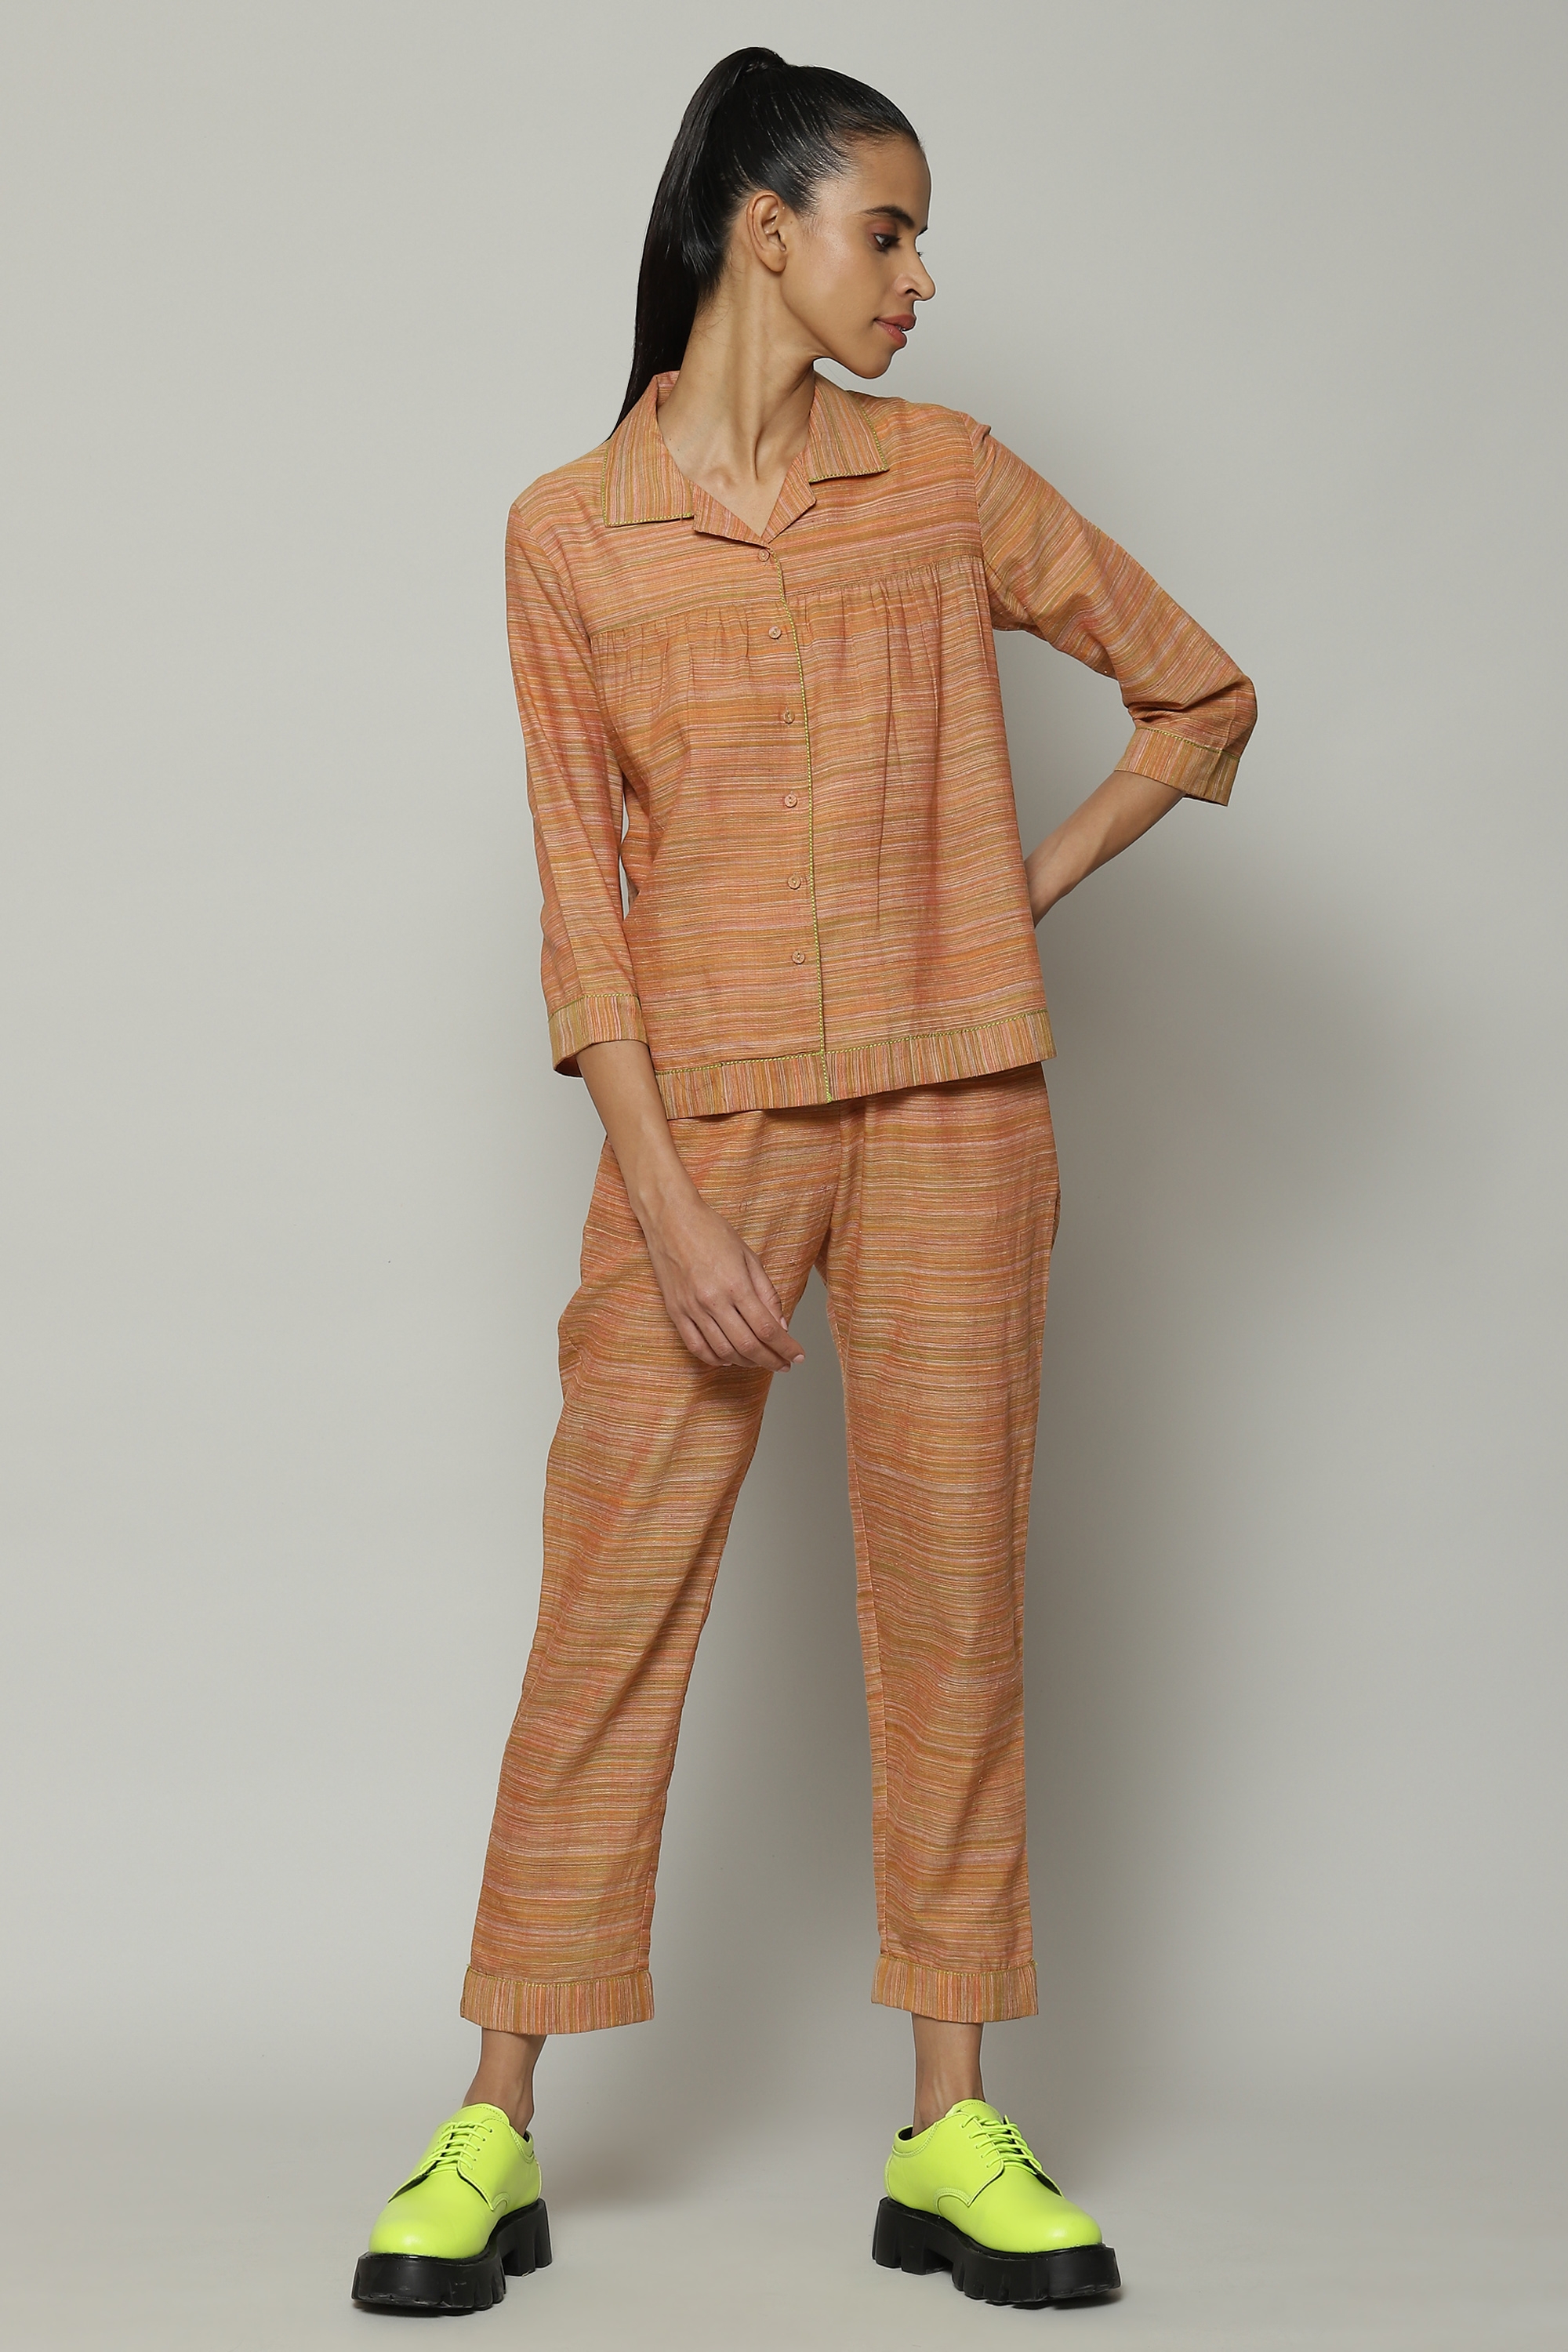 ABRAHAM AND THAKORE | Space Dyed Handspun Handwoven Tencel Cotton Top